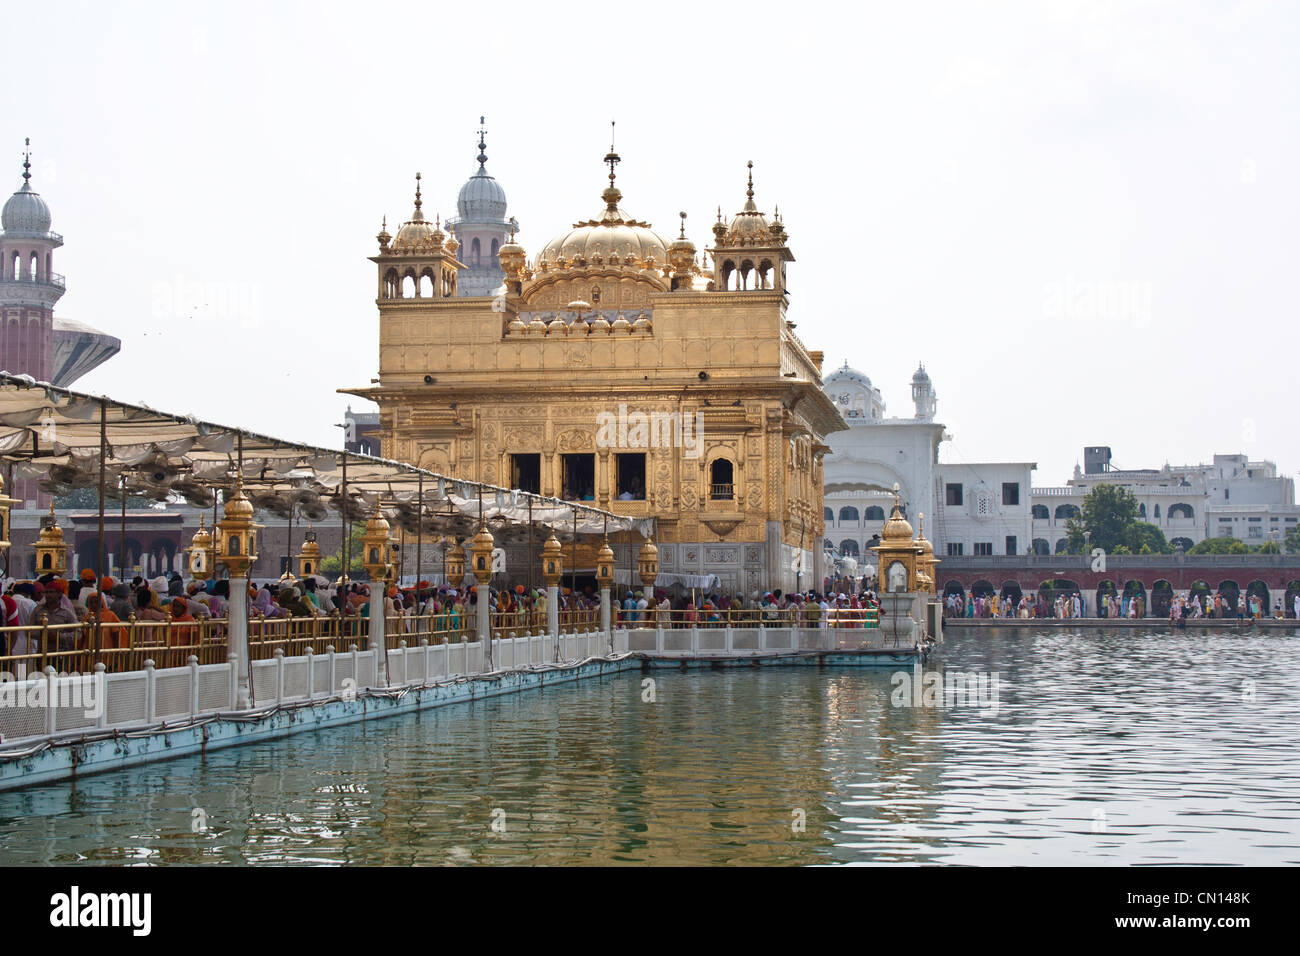 Causeway leading to the Golden Temple, the corridor crowded with devotees who wanted to go the Darbar Sahib and pray inside Stock Photo